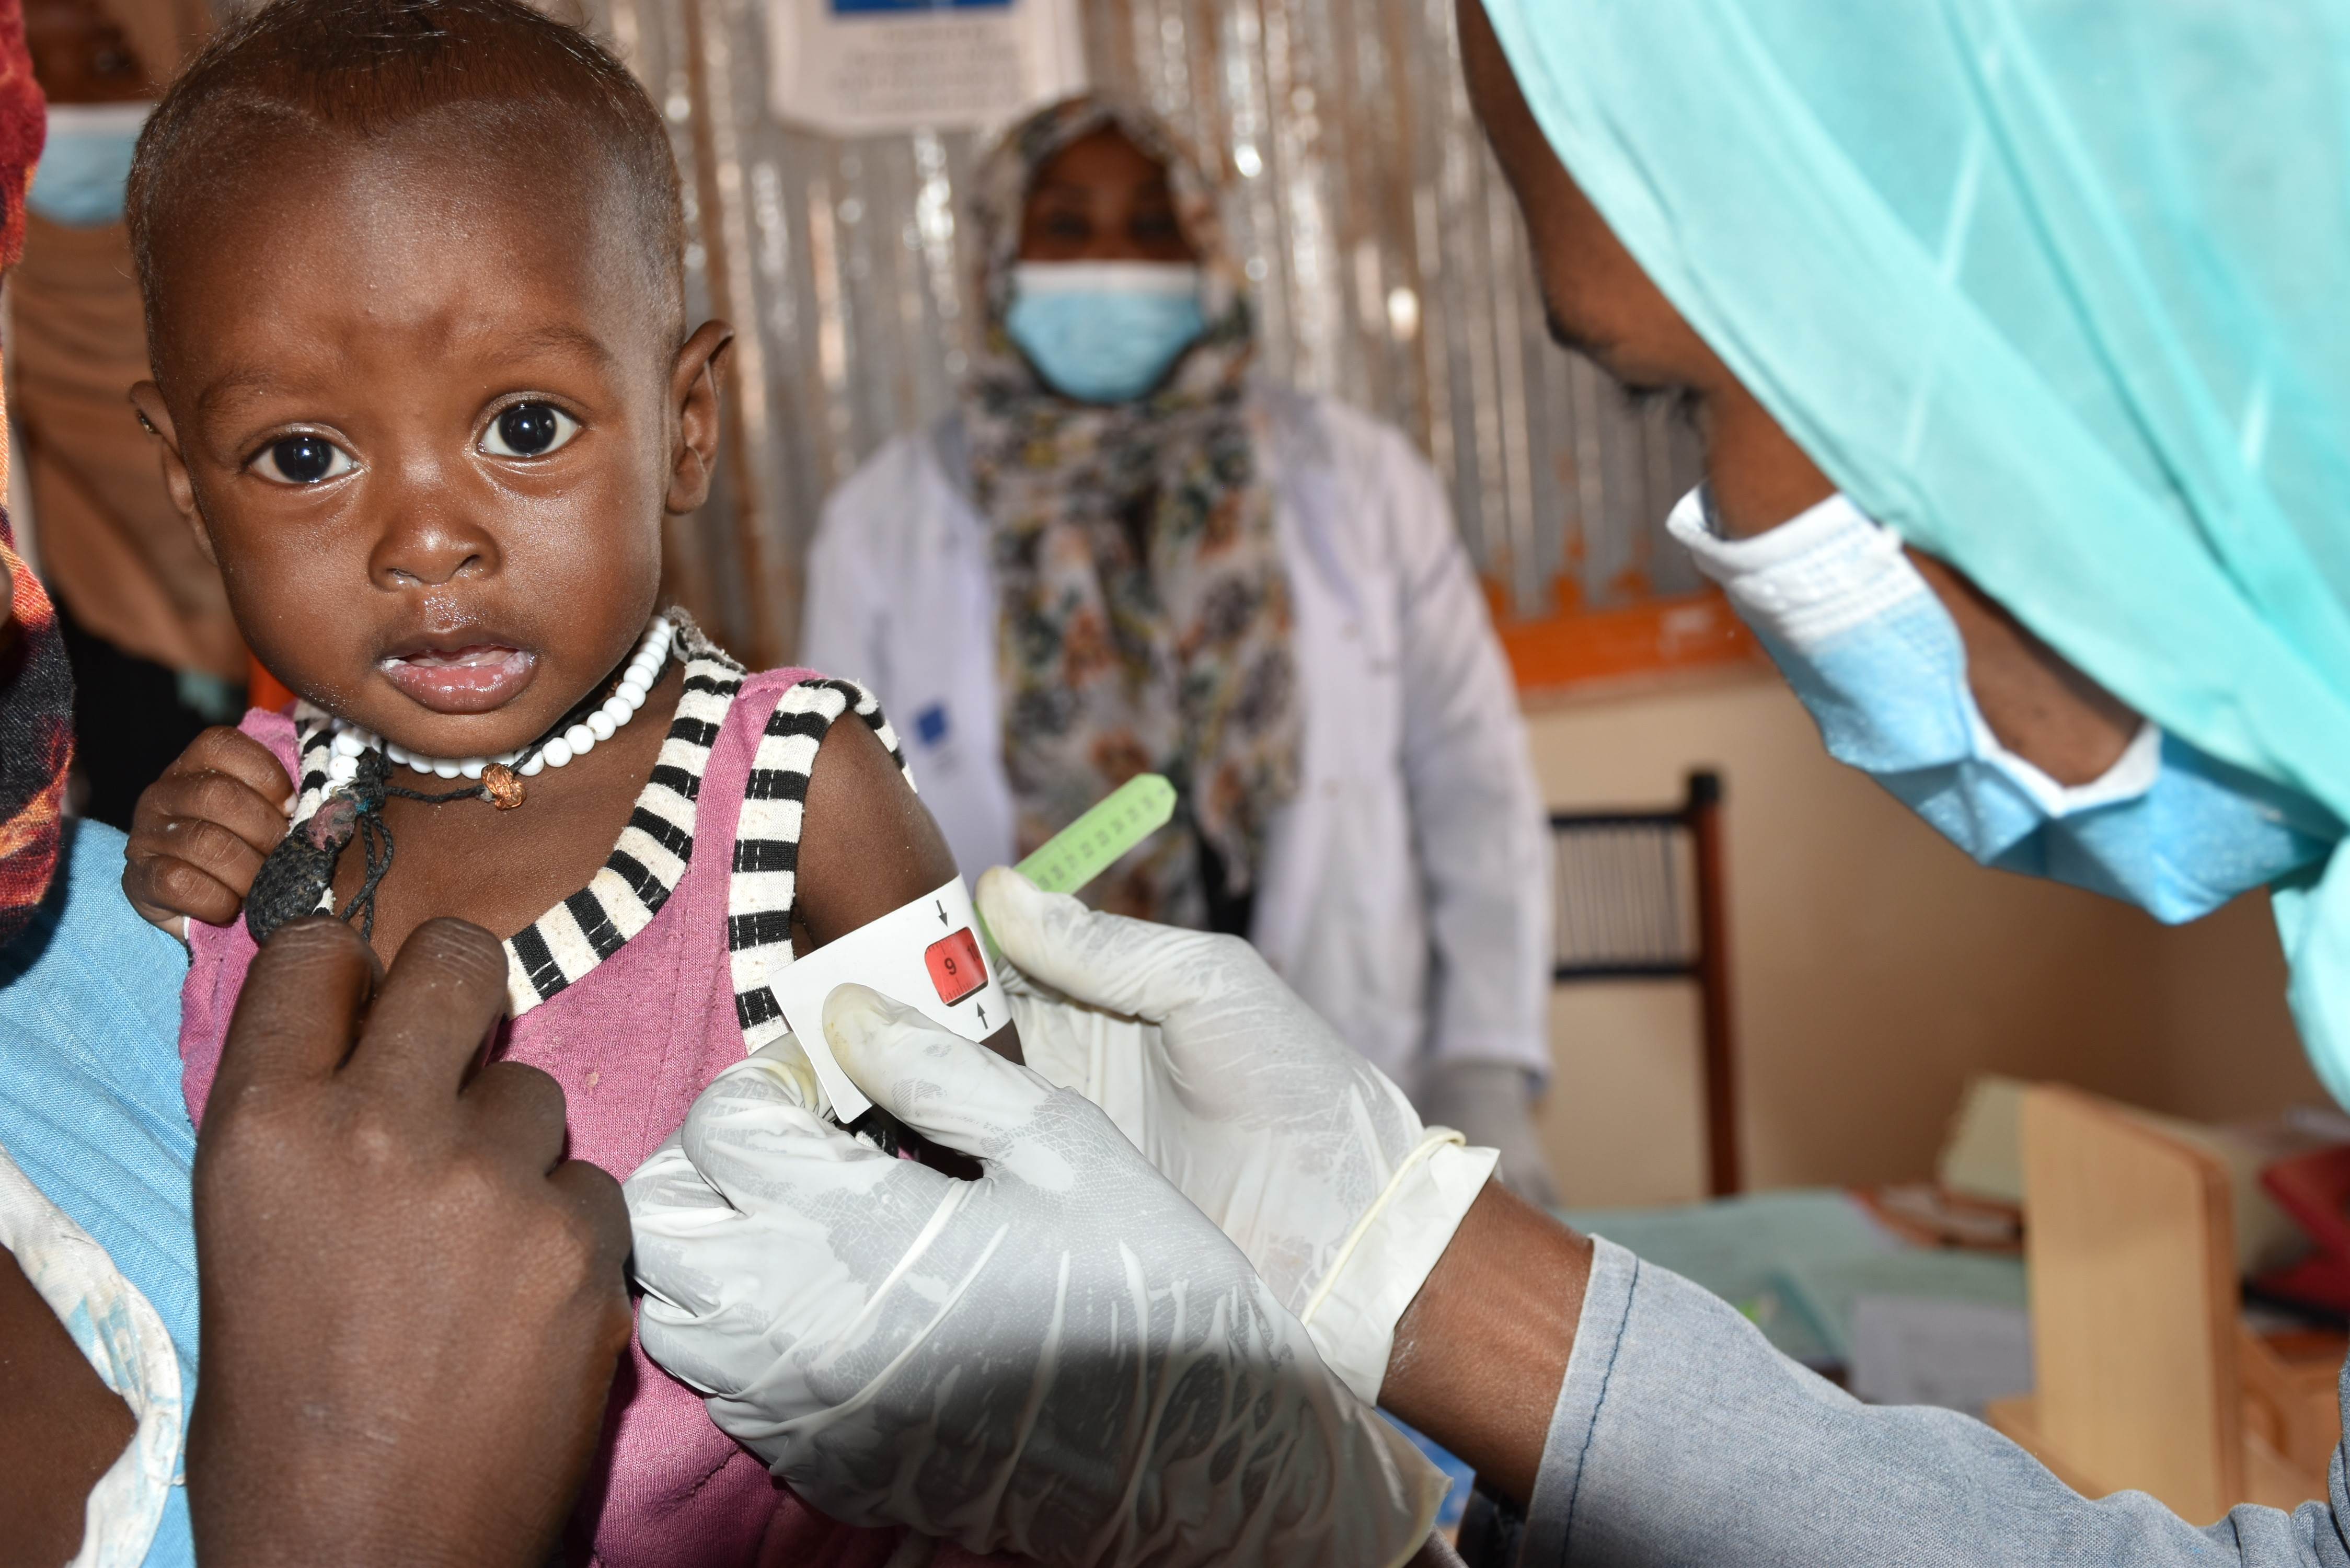 Naima continues to undergo rehabilitation for moderate acute malnutrition, at the World Vision-run OTP centre in Sudan.